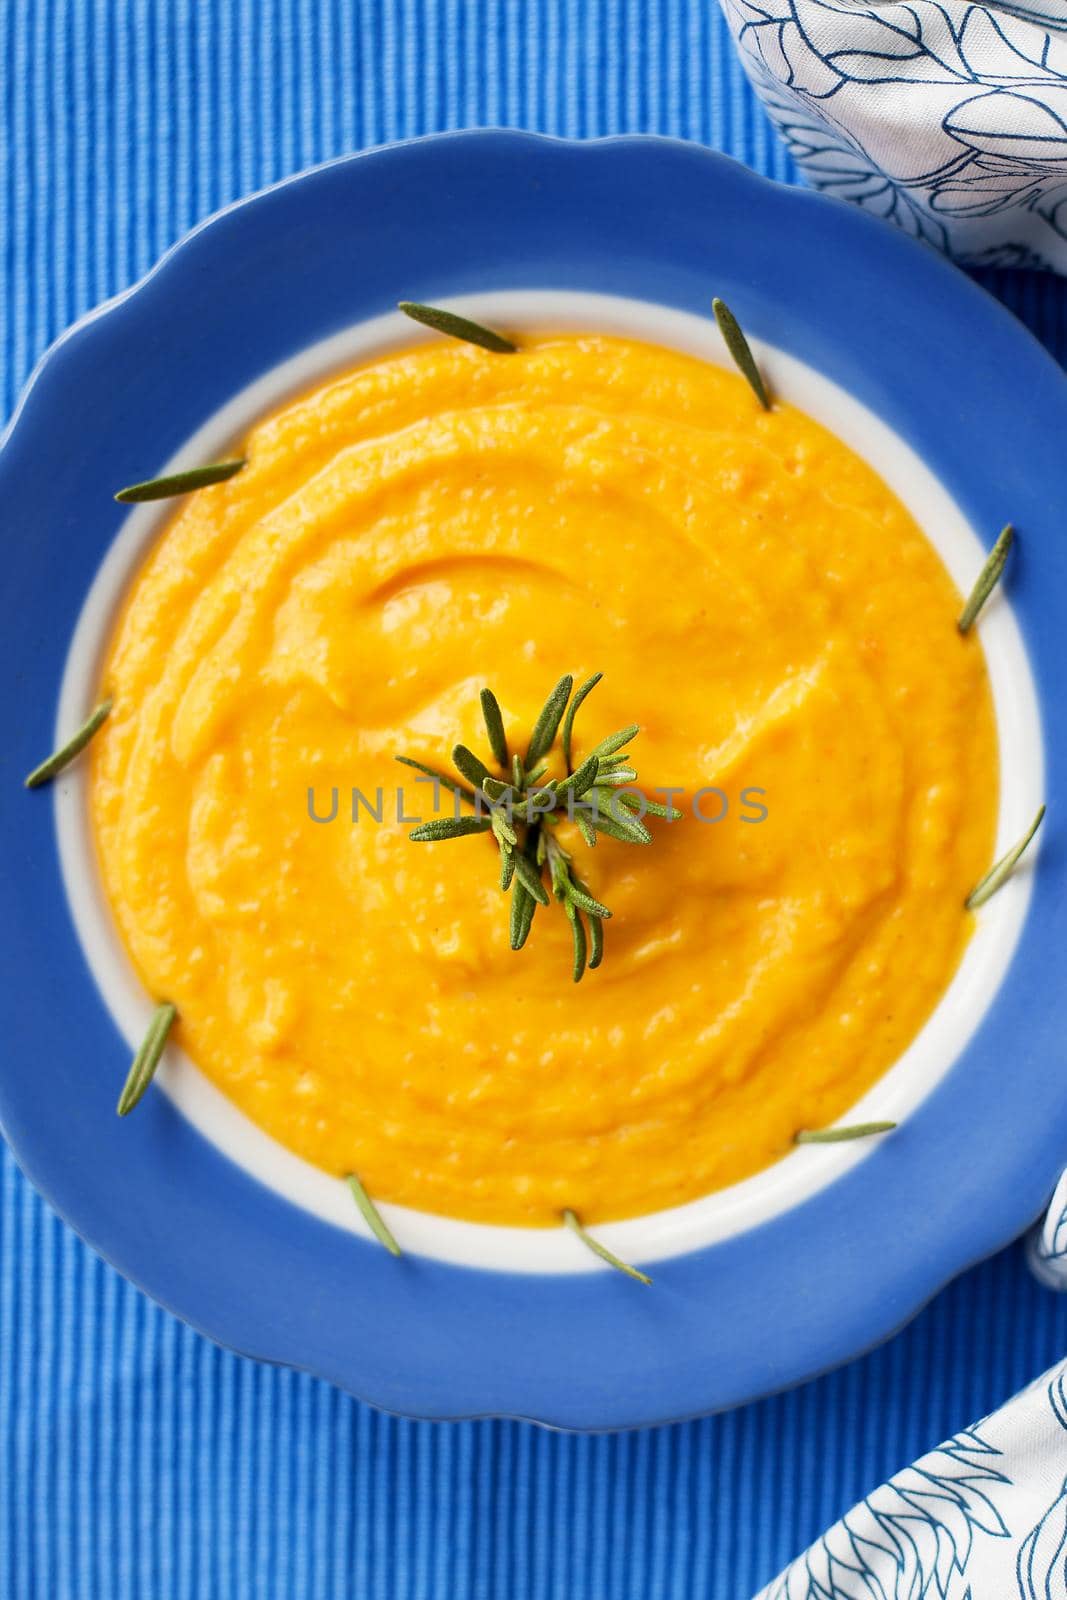 pumpkin cream soup in a blue plate on blue napkin with rosemary